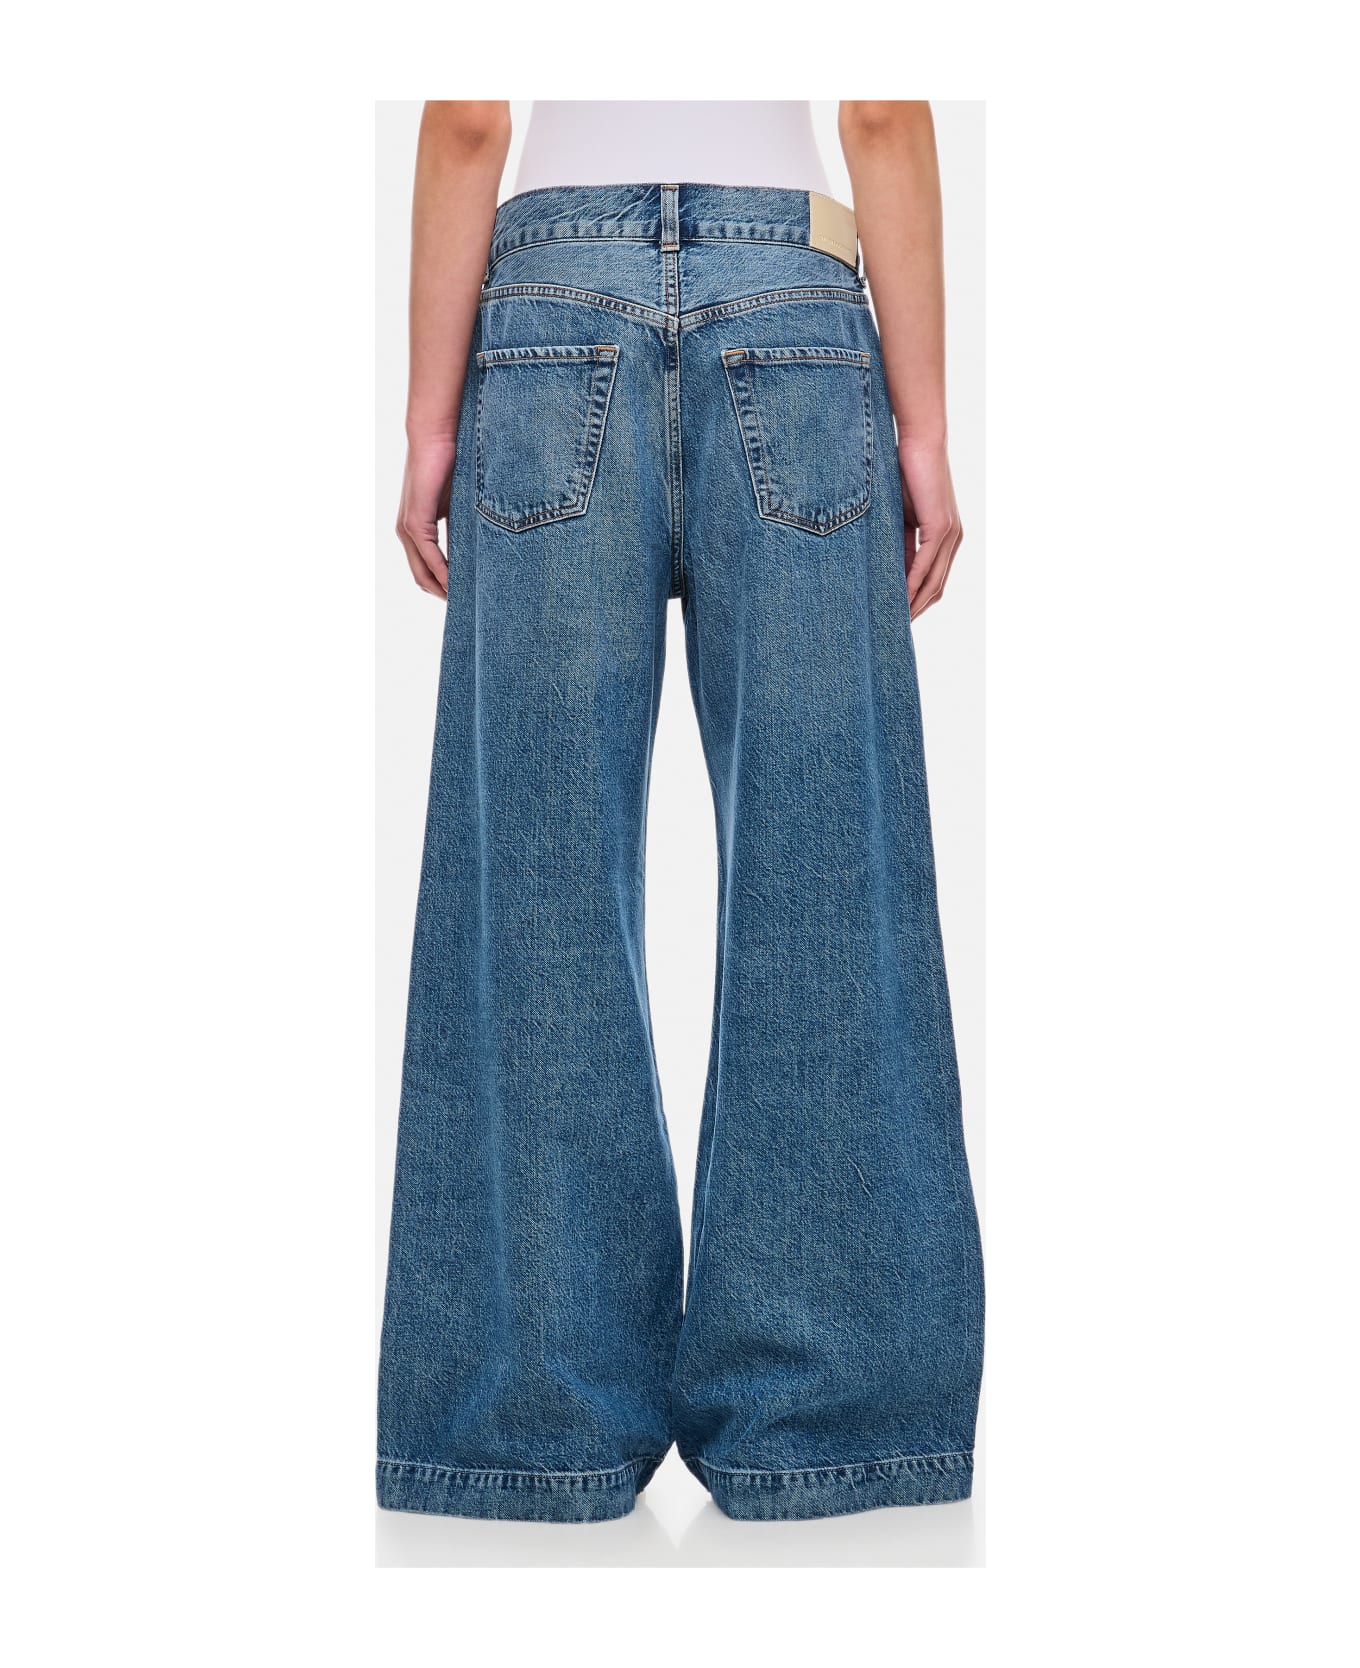 Citizens of Humanity Beverly Denim Pants - Blue